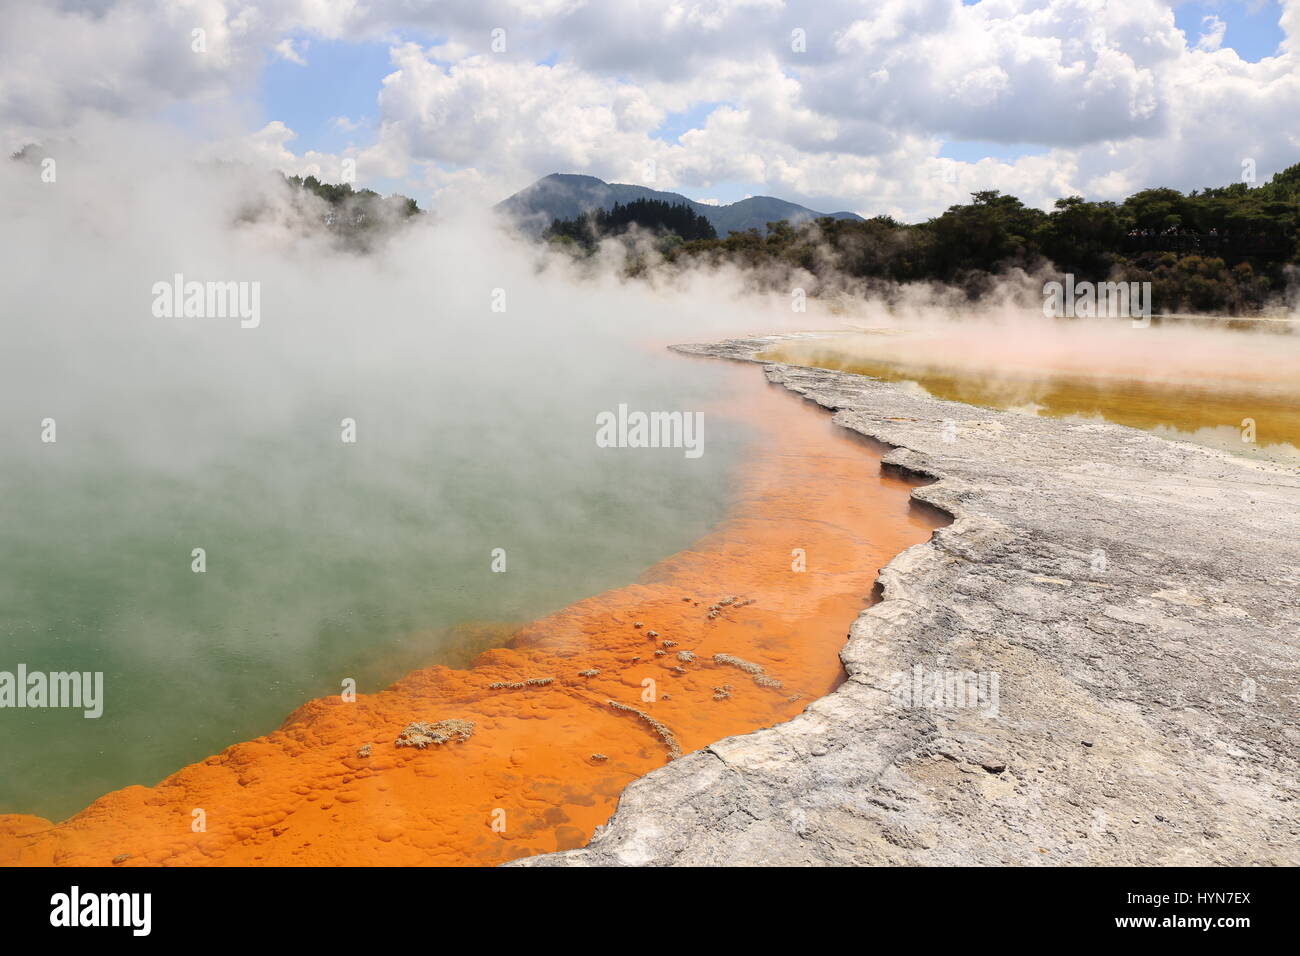 Champagne Pool at geothermal site, Wai-O-Tapu Thermal Wonderland on North Island of New Zealand Stock Photo